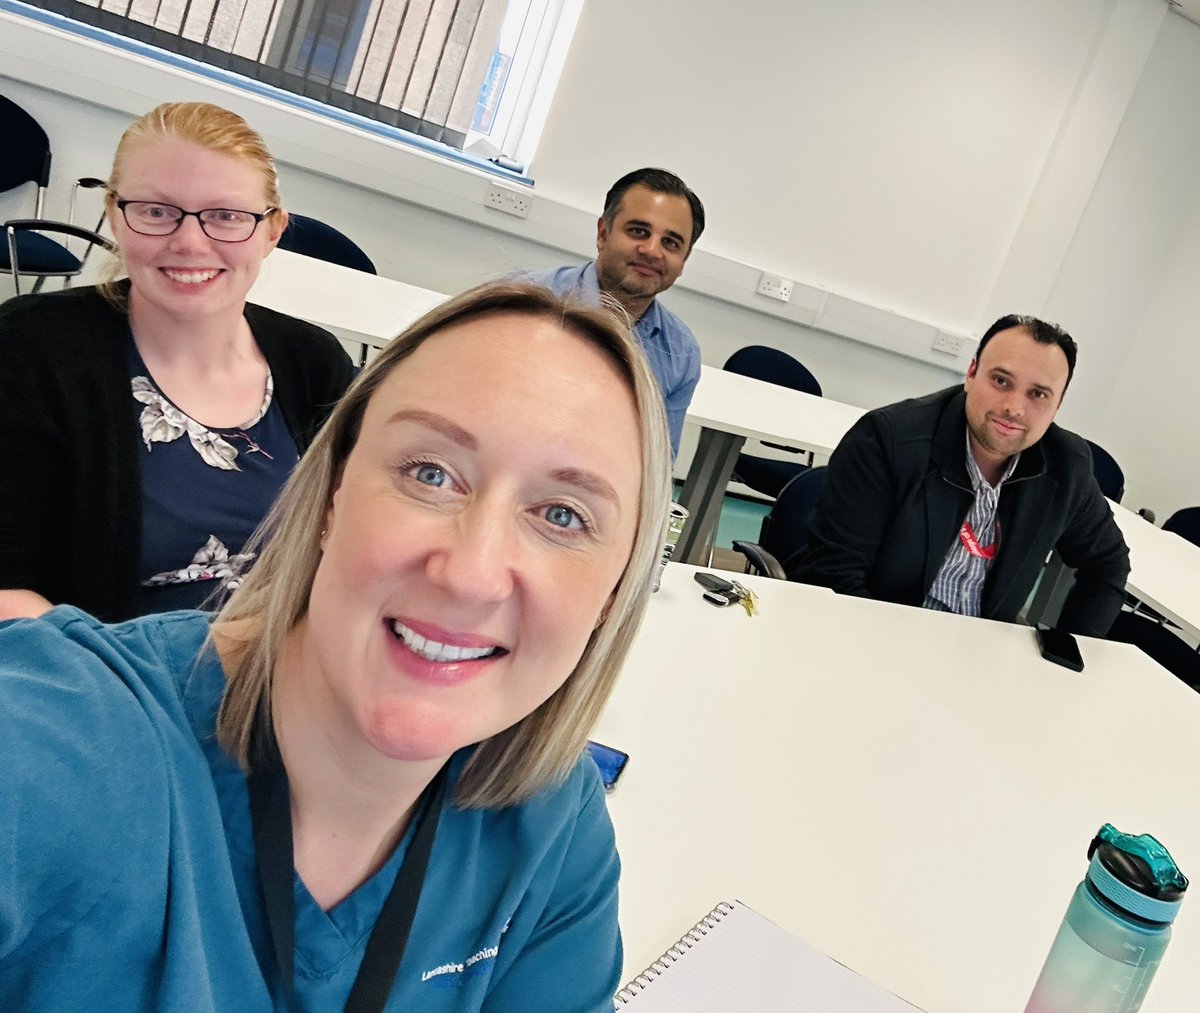 Respiratory virtual ward planning meeting to finish the week with a bang 💥 Great to share ideas with this team. Focusing on streamlining processes to improve patient care. Lots of exciting things to come. 🤩